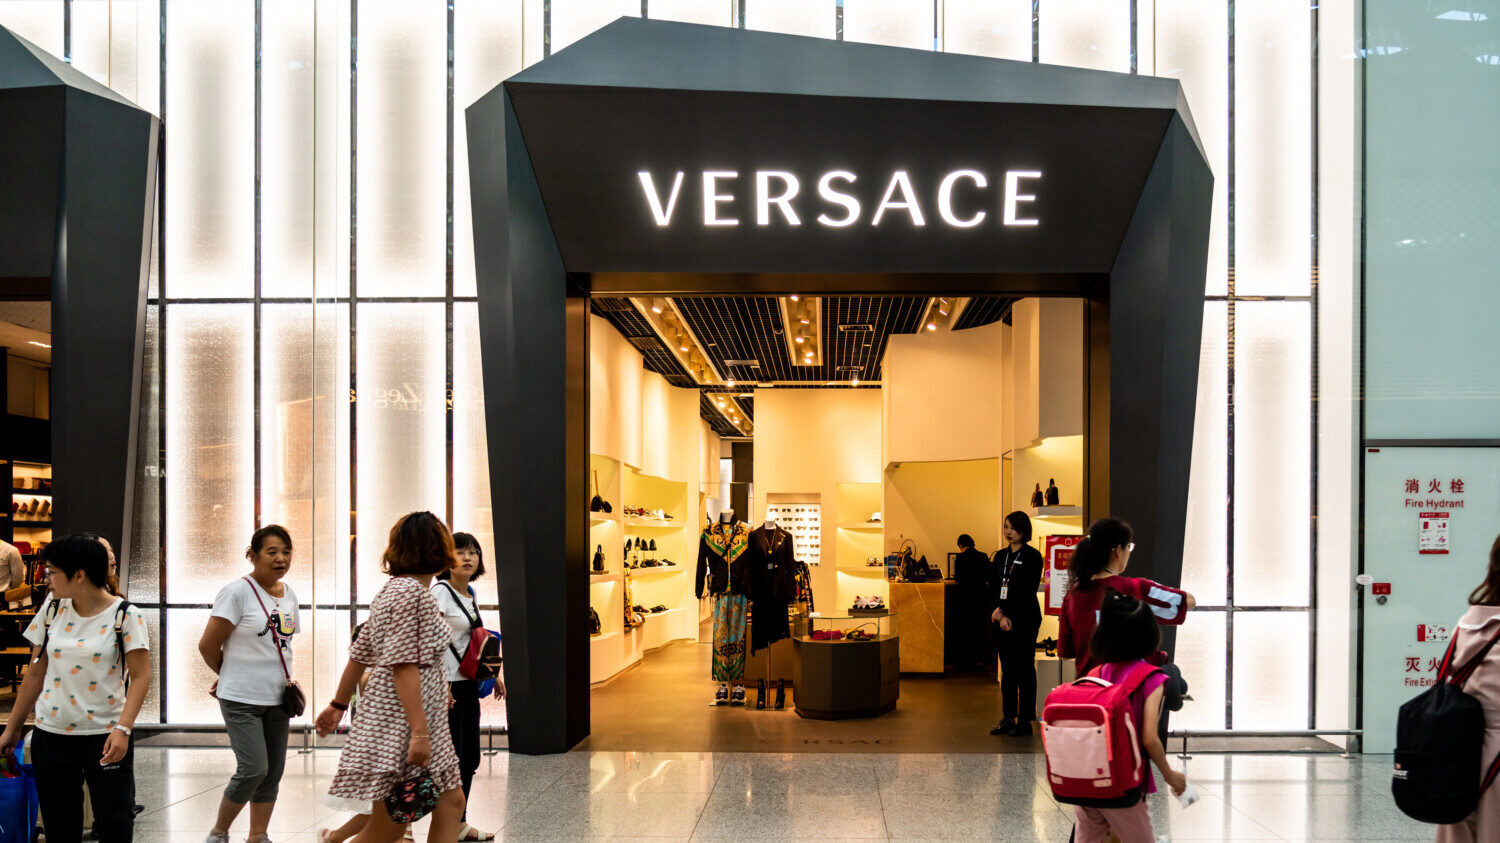 Coach parent Tapestry buying Capri, owner of Michael Kors and Versace, in  $8.5 billion deal